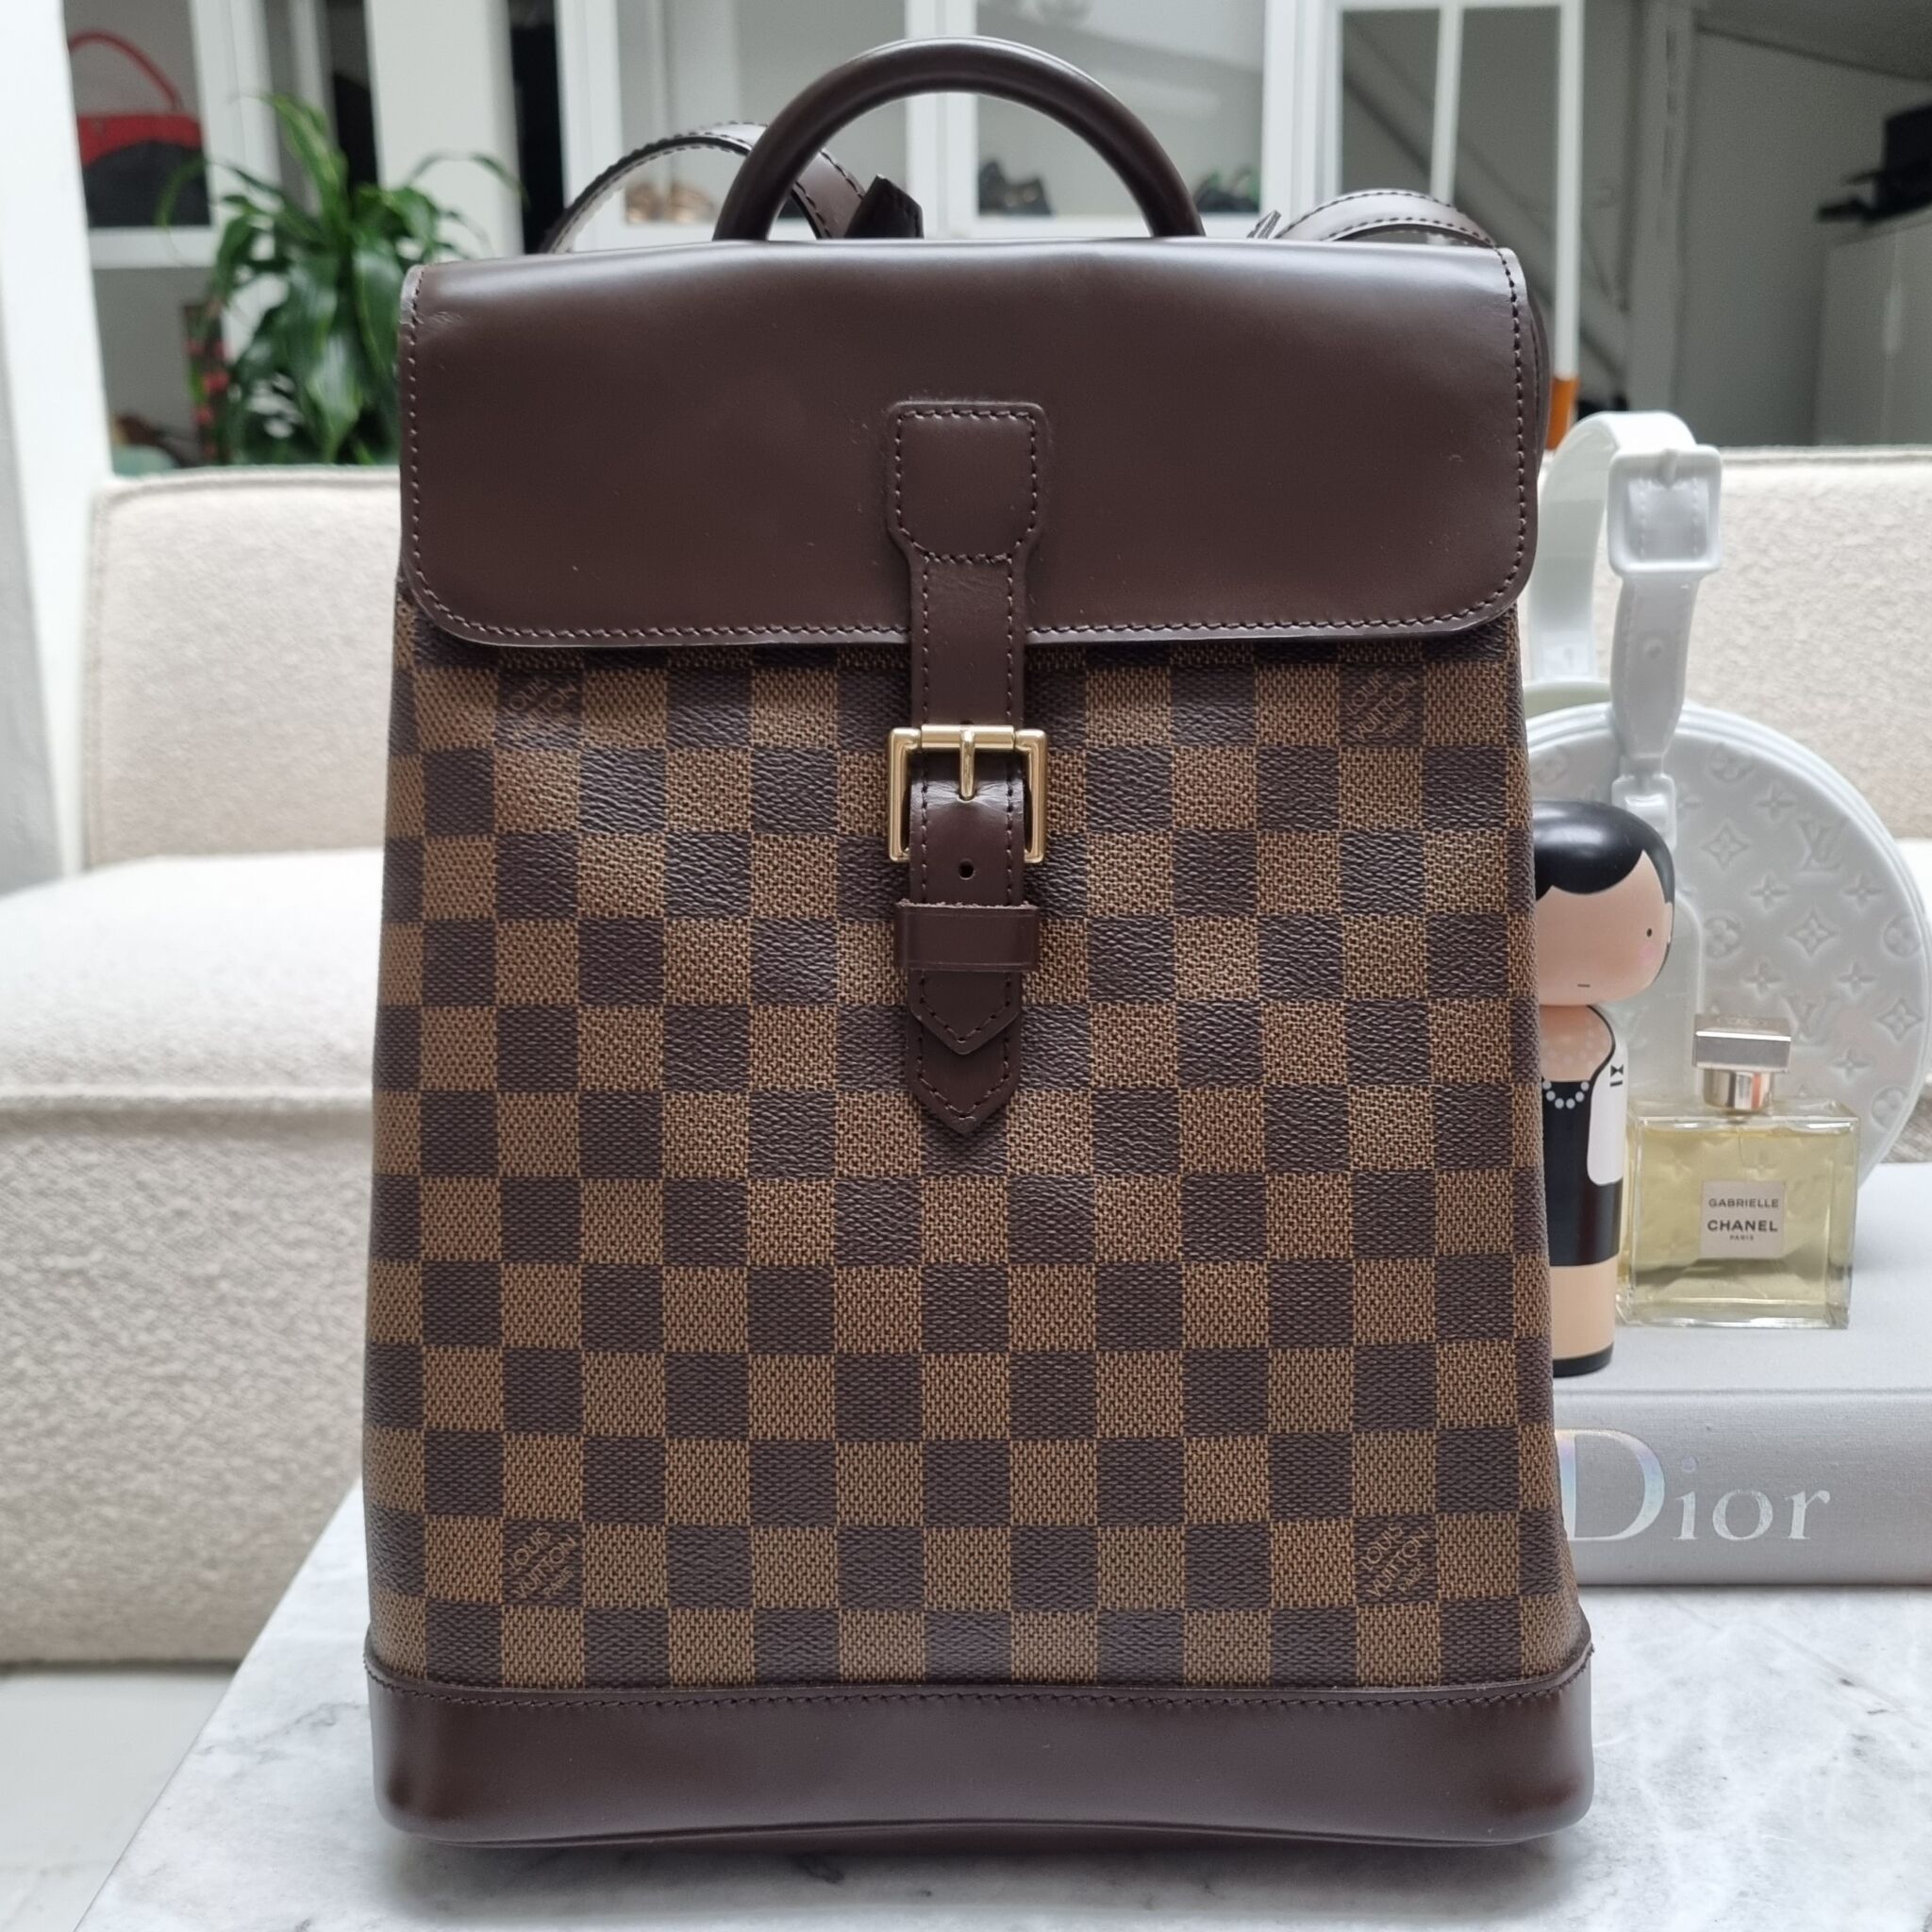 Louis Vuitton Soho Backpack in Ebene Damier Canvas and Brown Leather